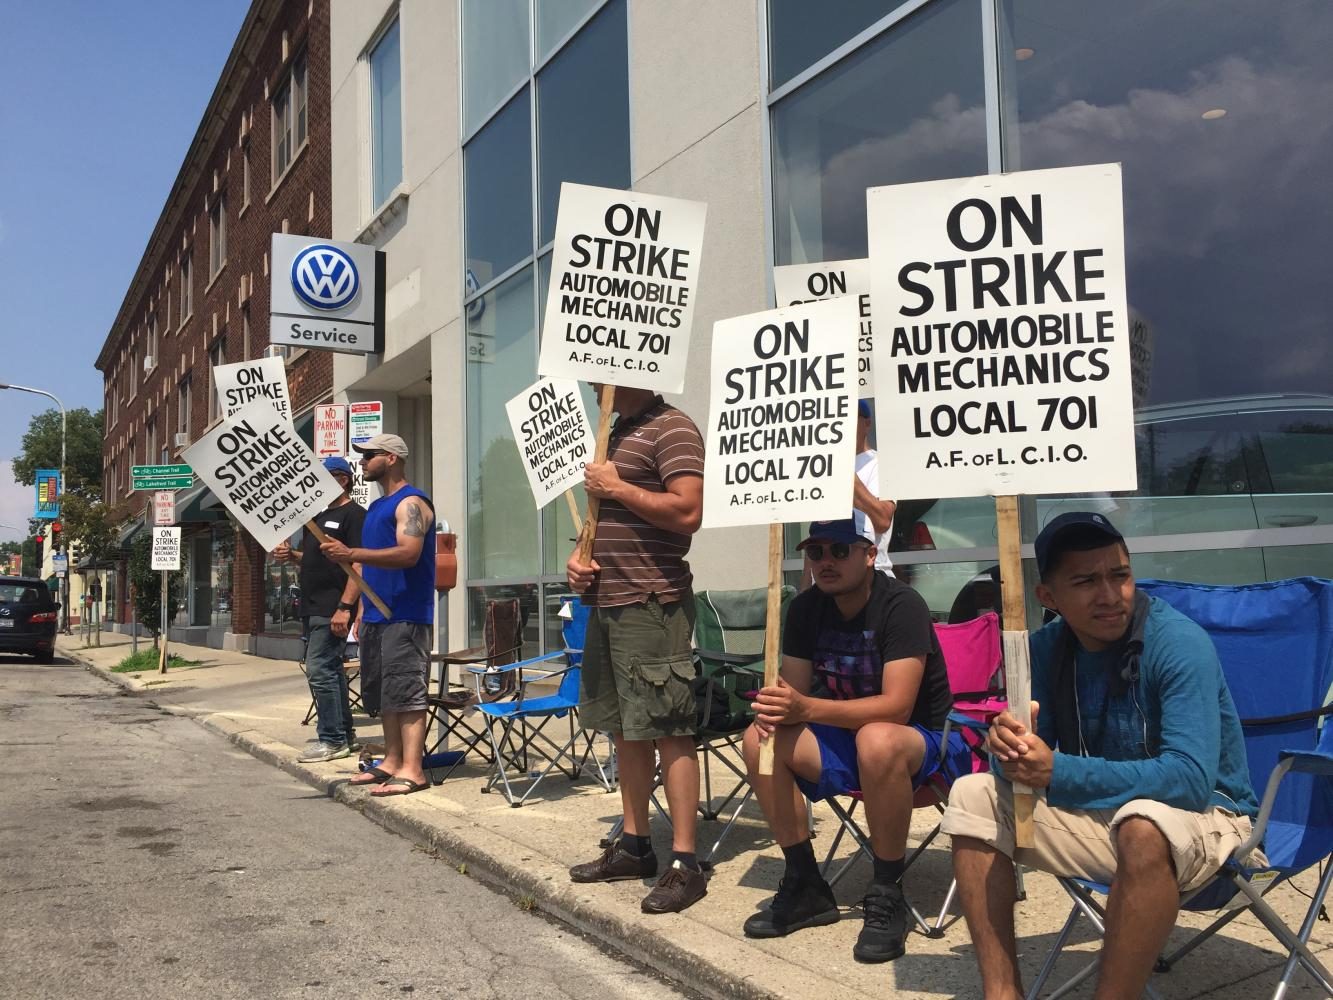 Auto+mechanics+on+strike+outside+the+Autobahn+Volkswagen+in+Evanston.+The+mechanics+are+among+2%2C000+striking+throughout+the+Chicago+area.